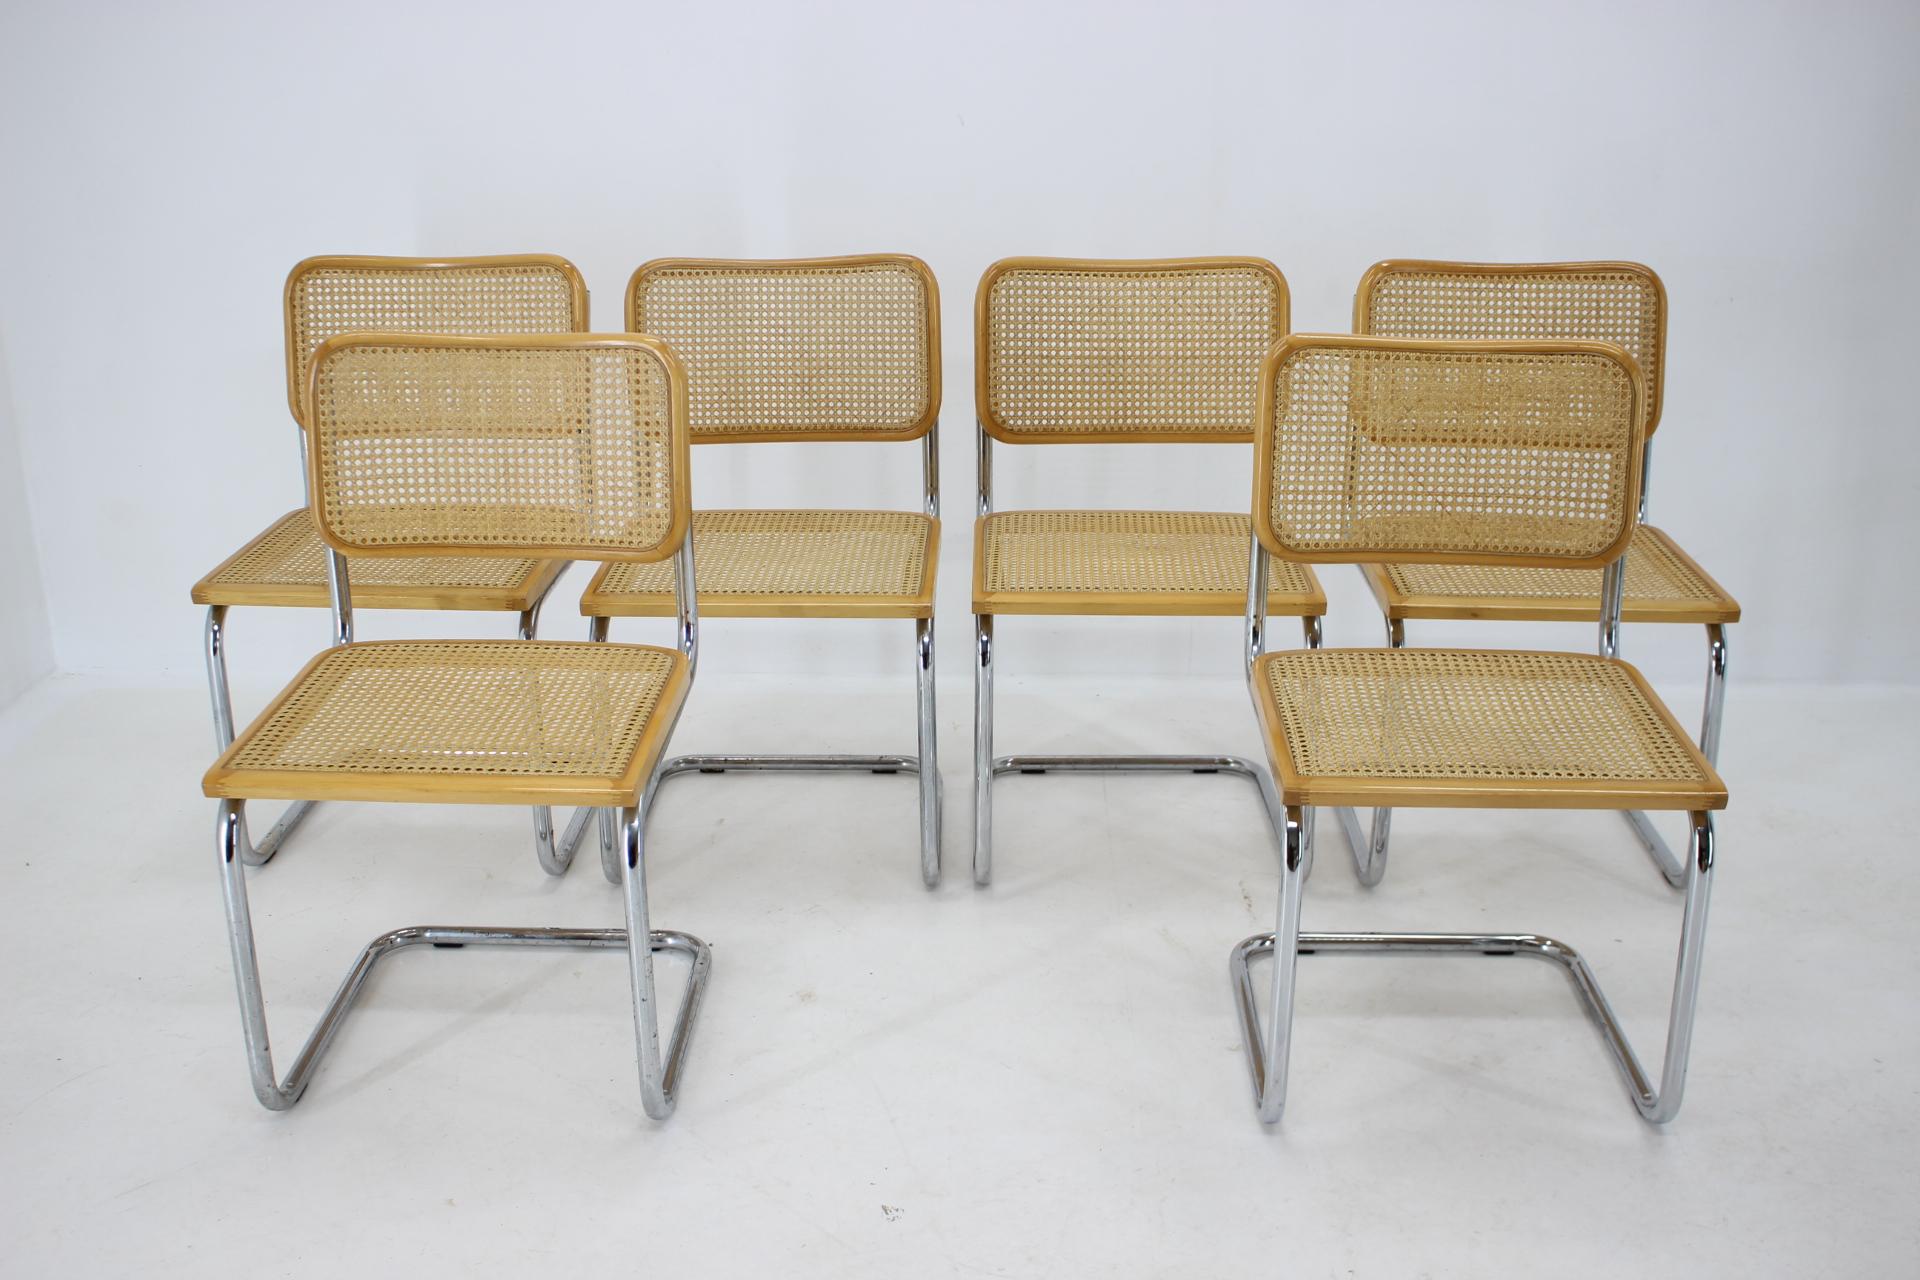 - Good original condition with minor signs of use 
- The caned string seats are in good original condition 
- The chrome plated parts in good condition with some signs of use 
- Height of seat 45 cm.